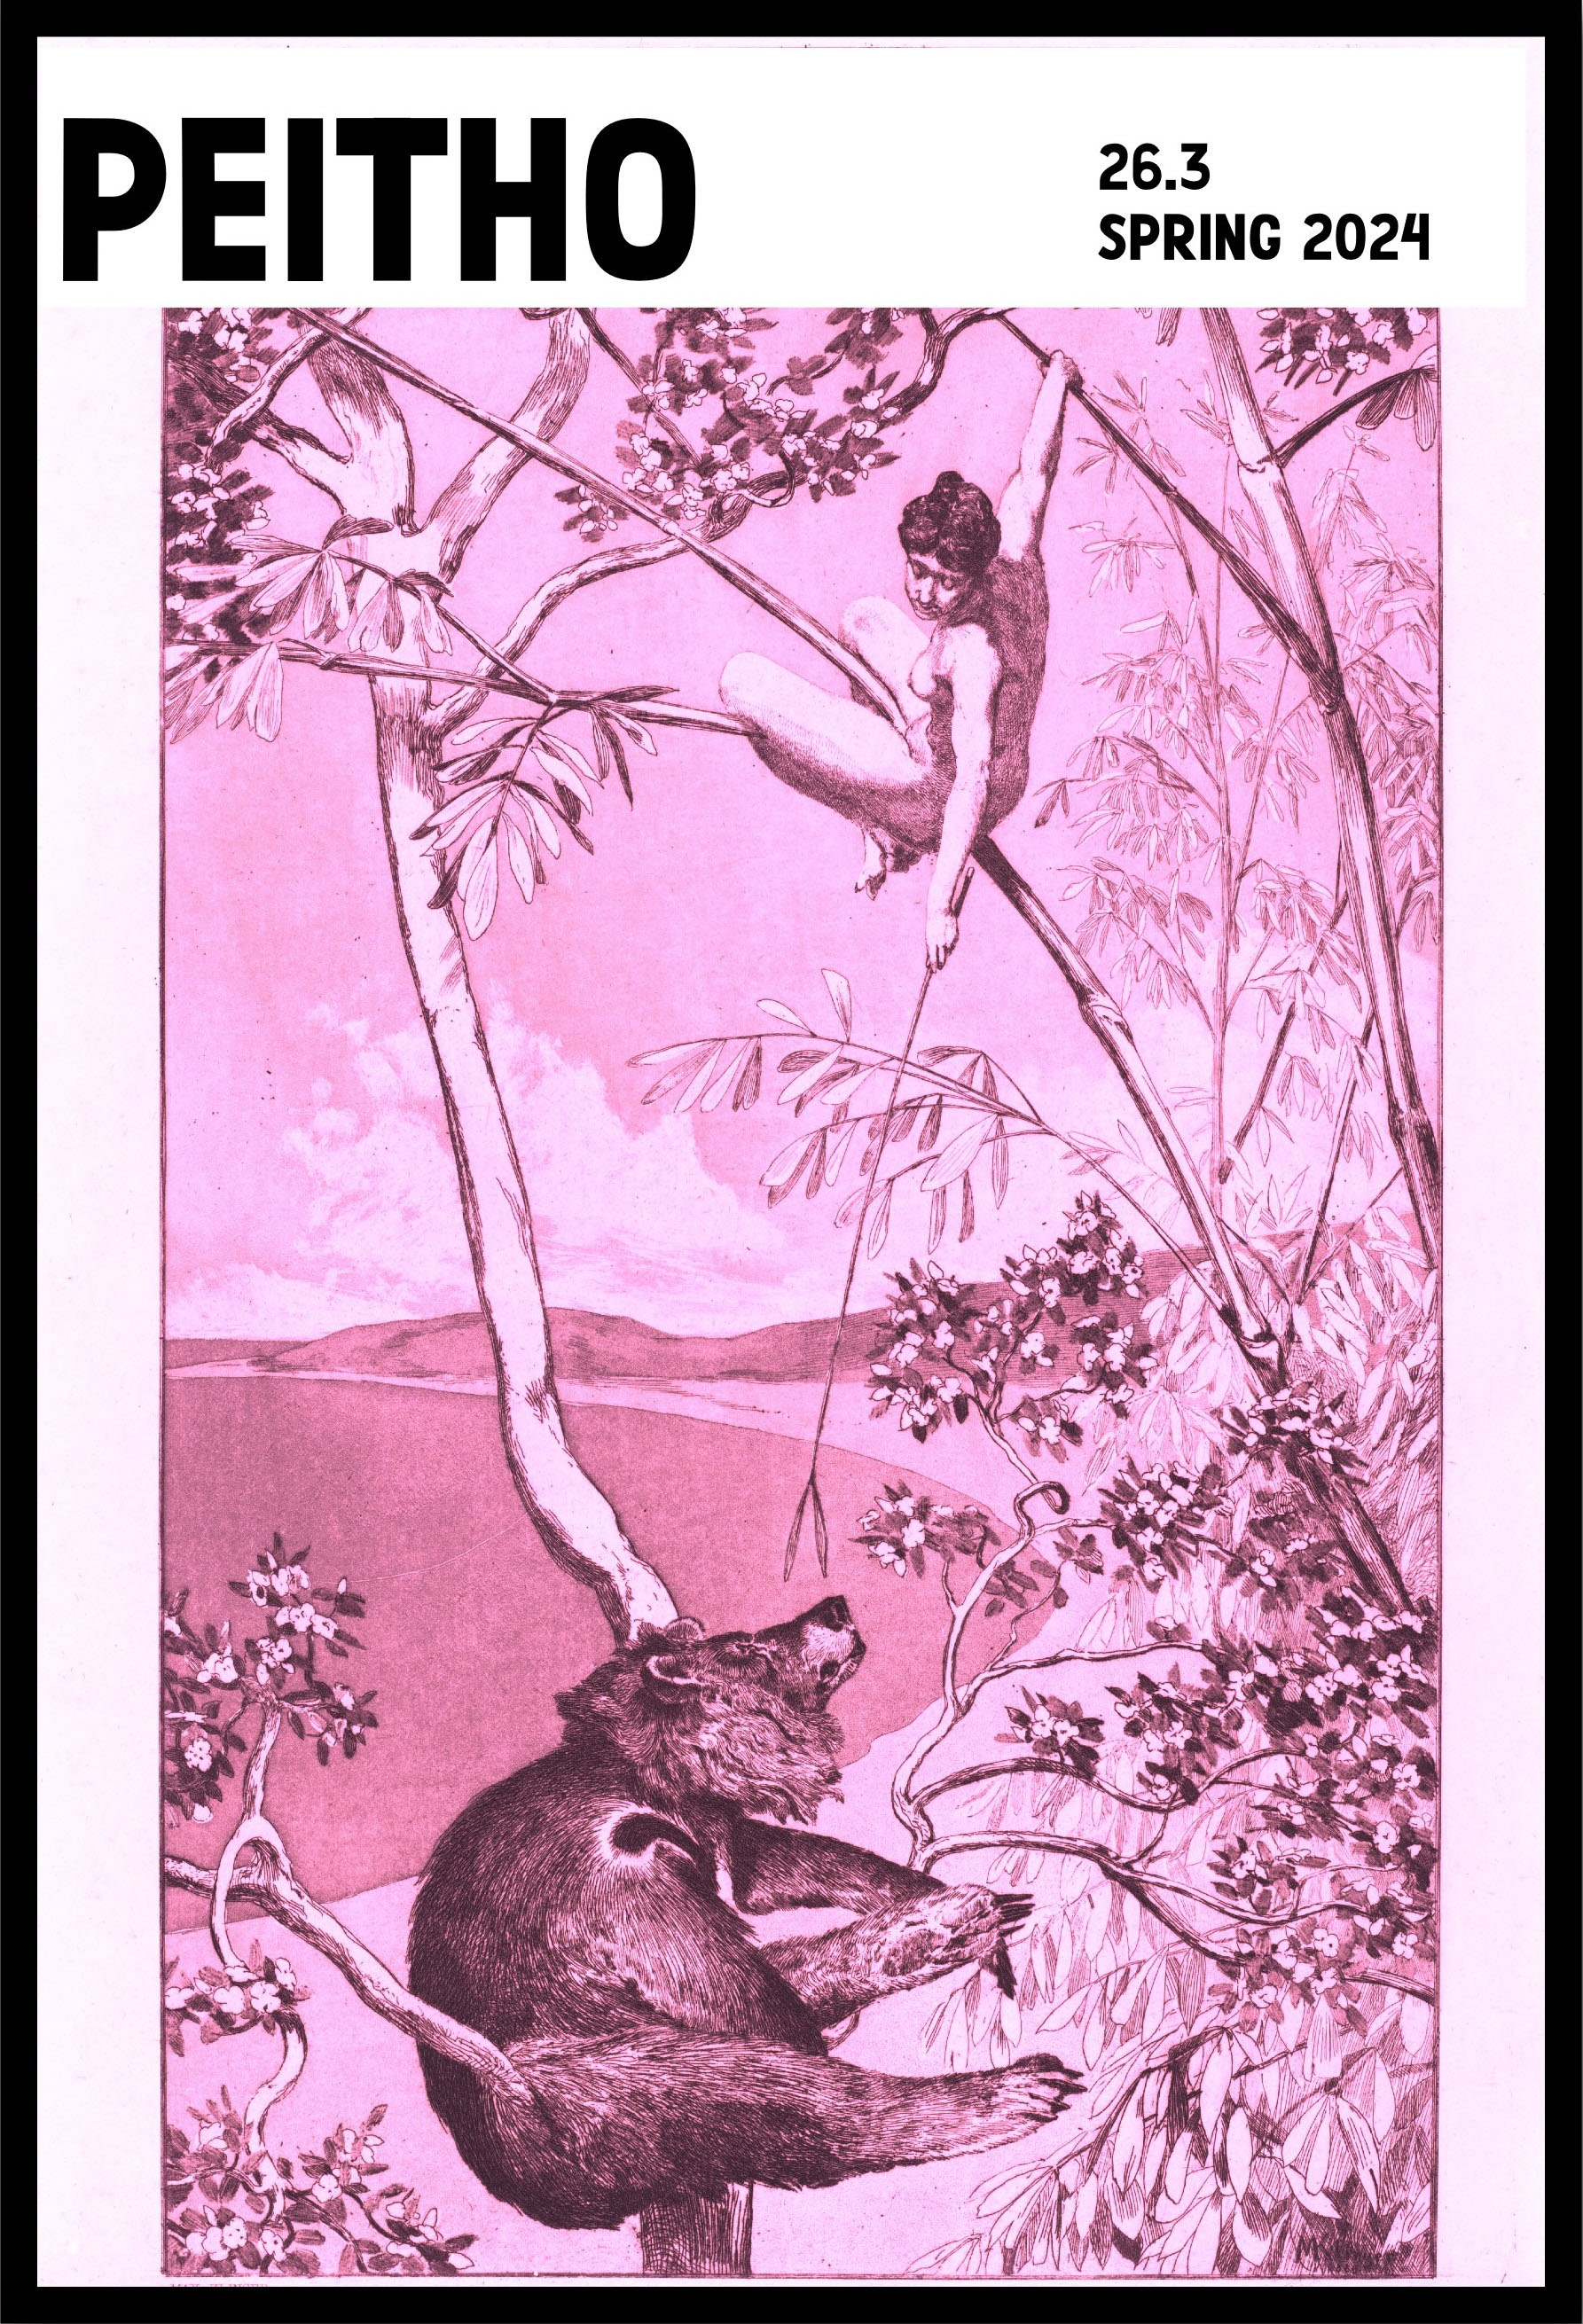 A print (etching and aquatint) showing an elf woman in a tree. She is nude and is using a long branch to point downward at a bear who is looking up at her. In the background are other leafy branches and a scenic cove. The print has a pink tint, and at the top left is the word Peitho. At the top right is written '26.3 Spring 2024.' Around the whole image is a black frame. The original art is by Max Klinger and is titled Bear and Elf (Bär und Elfe). It was created in 1881 and is in the National Gallery of Art’s public domain collection of images.